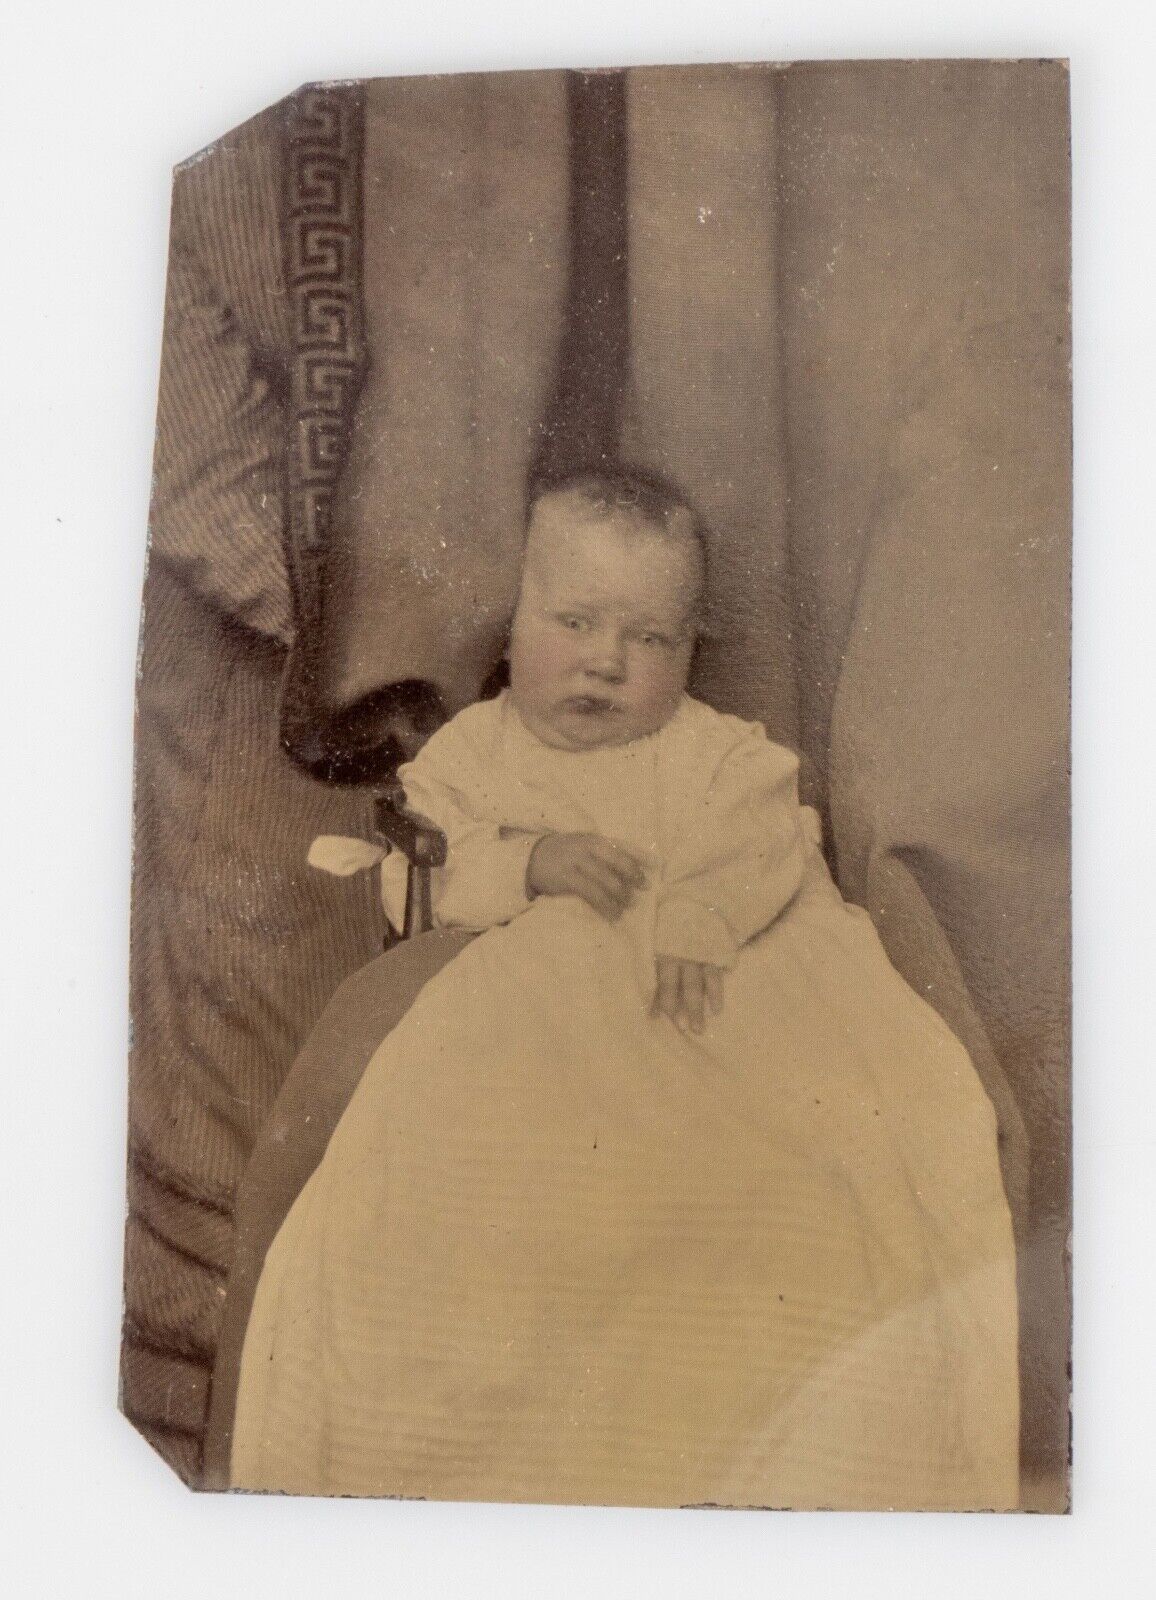 19thC Tintype Portrait of a Baby Hand Colored Likely Post Mortem